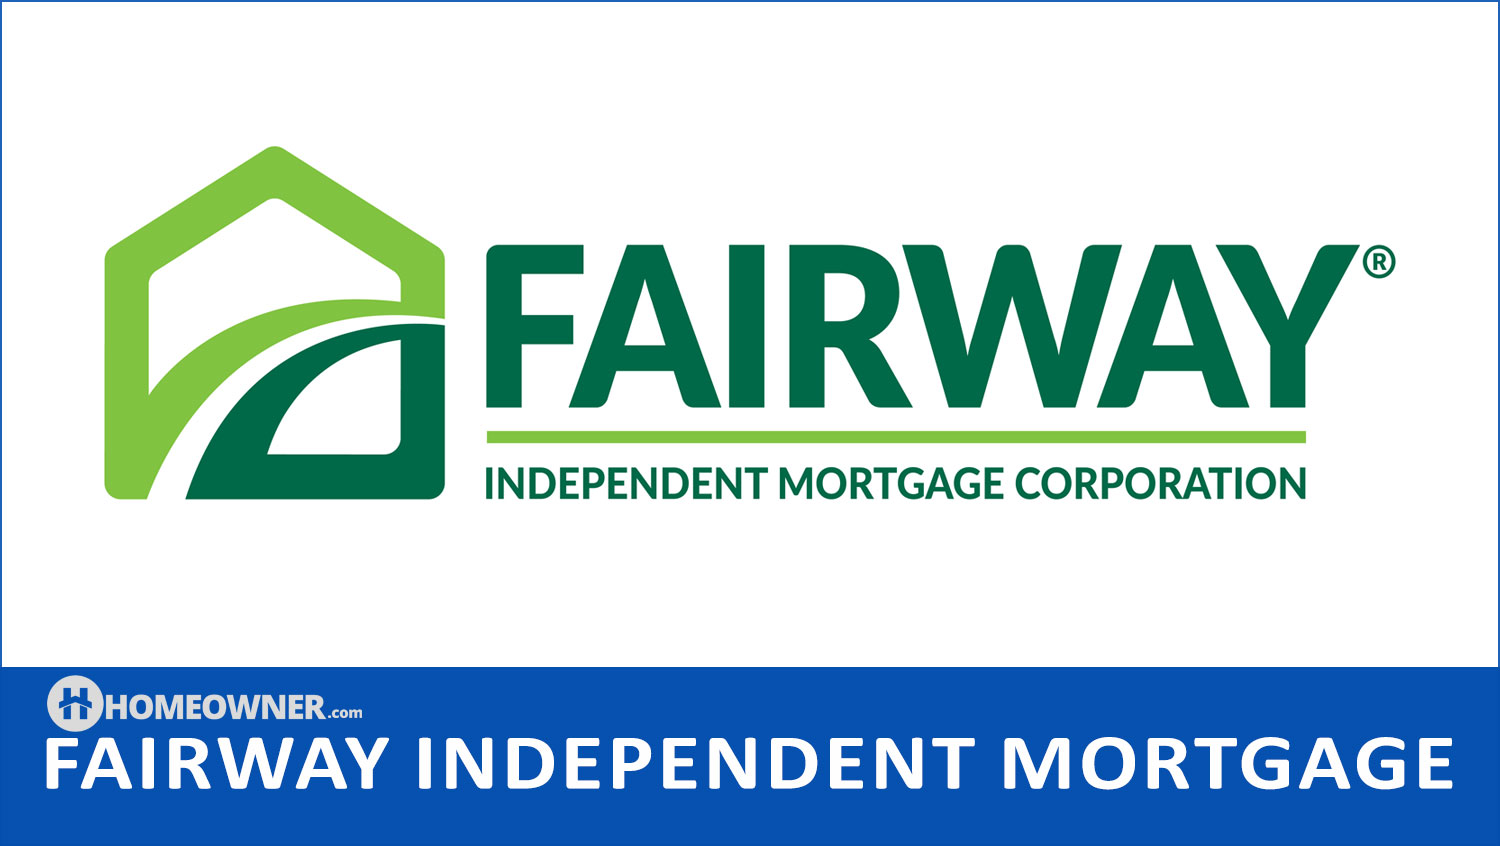 Fairway Independent Mortgage Corporation - 2023 Lender Review